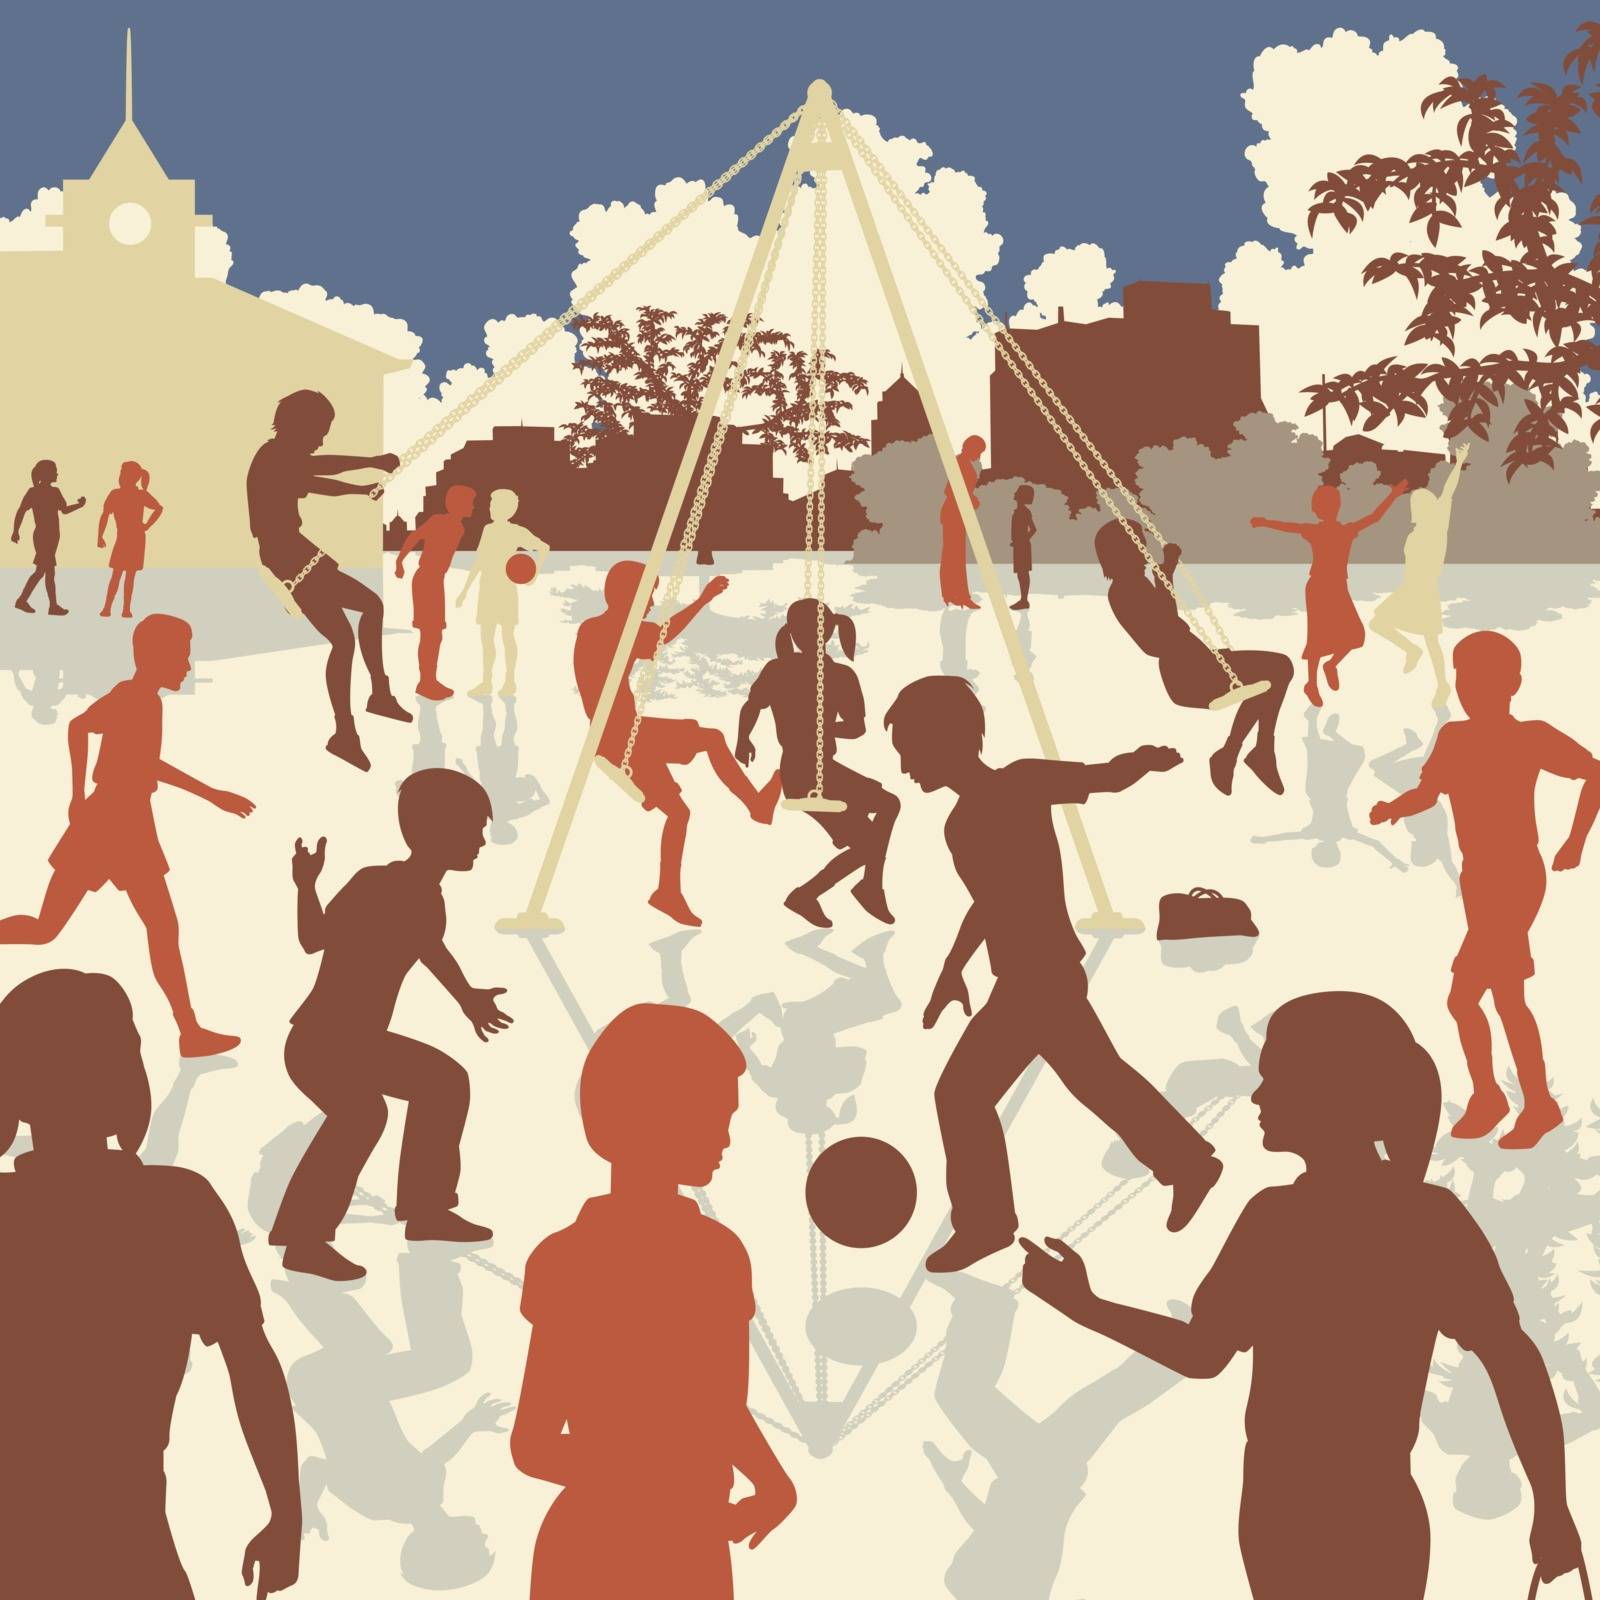 EPS8 editable vector illustration of children playing in a school playground